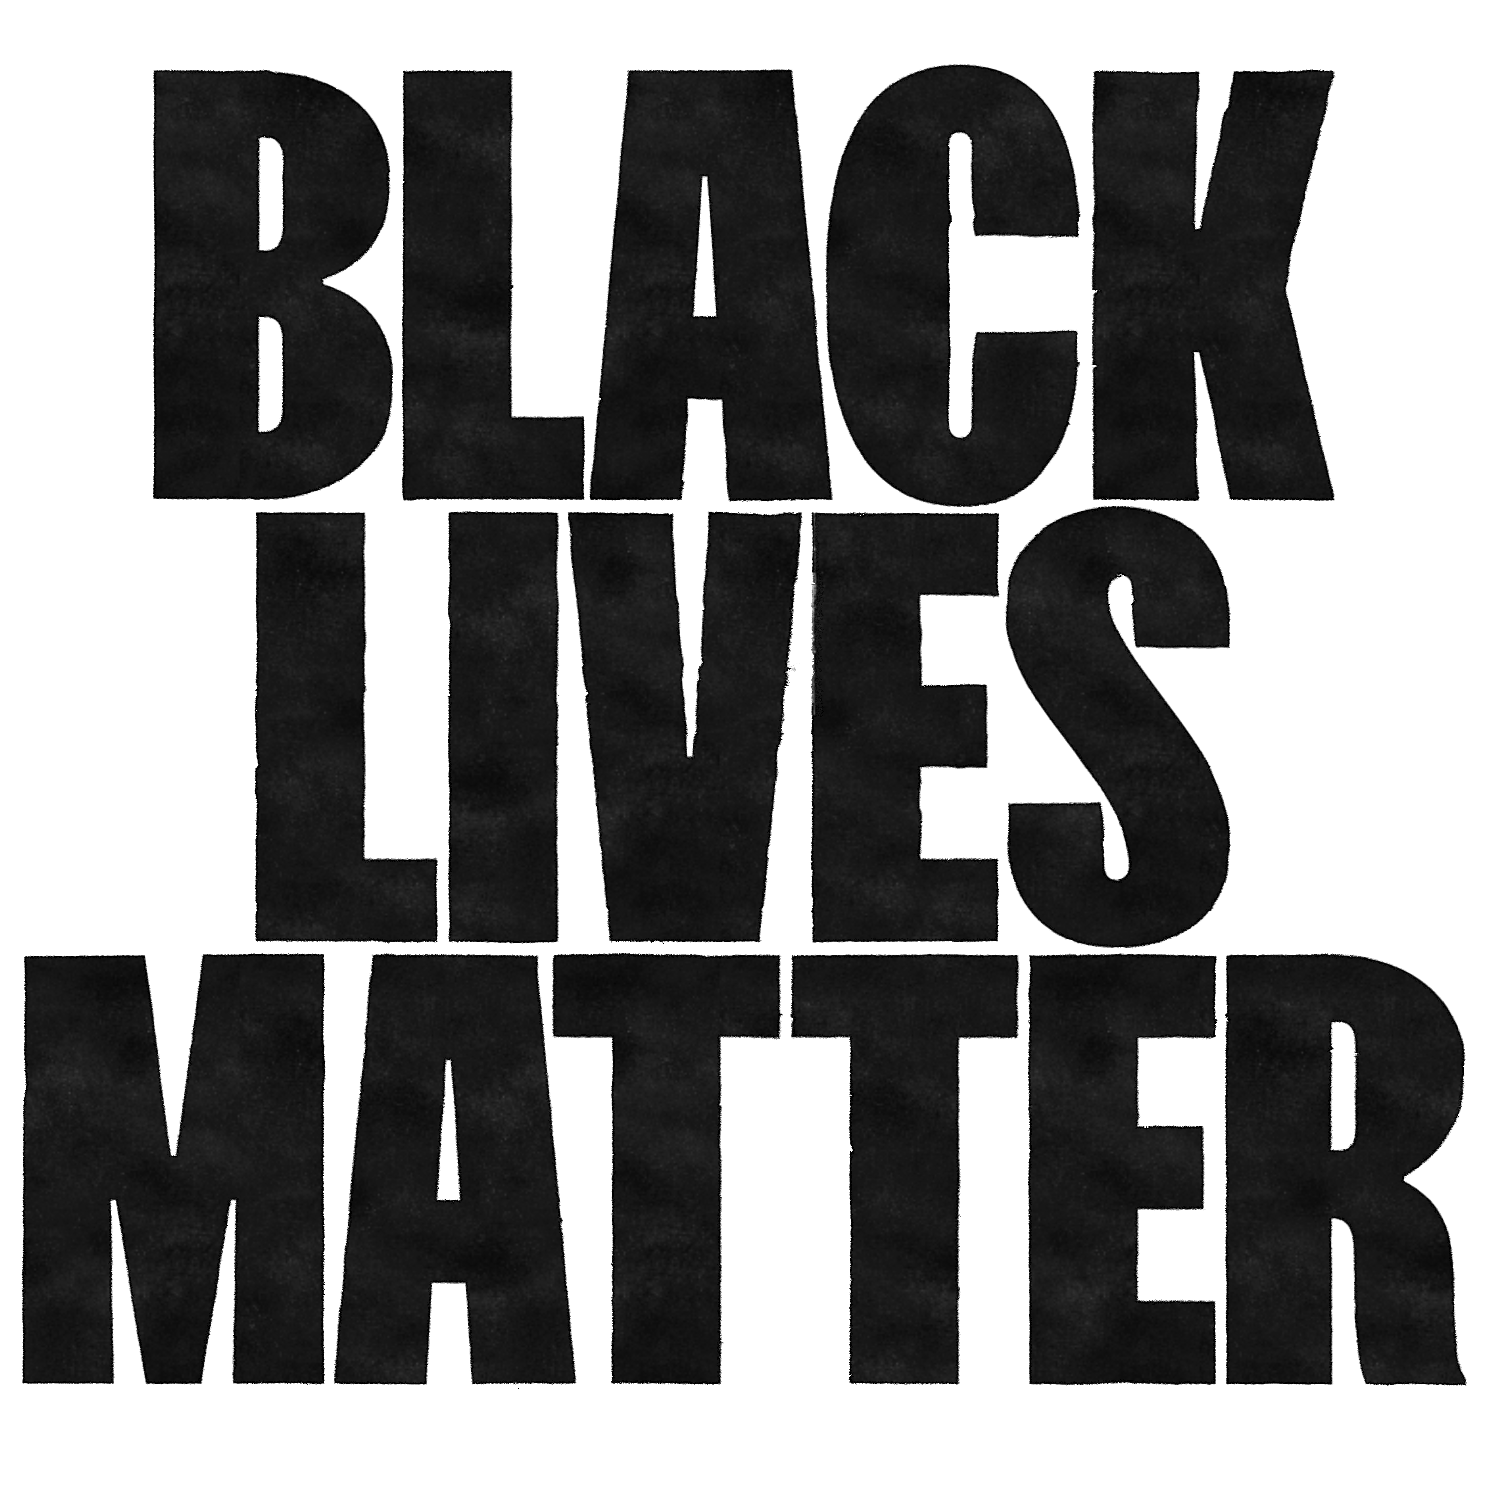 Black lives matter. 
Our journey towards meaningful change.